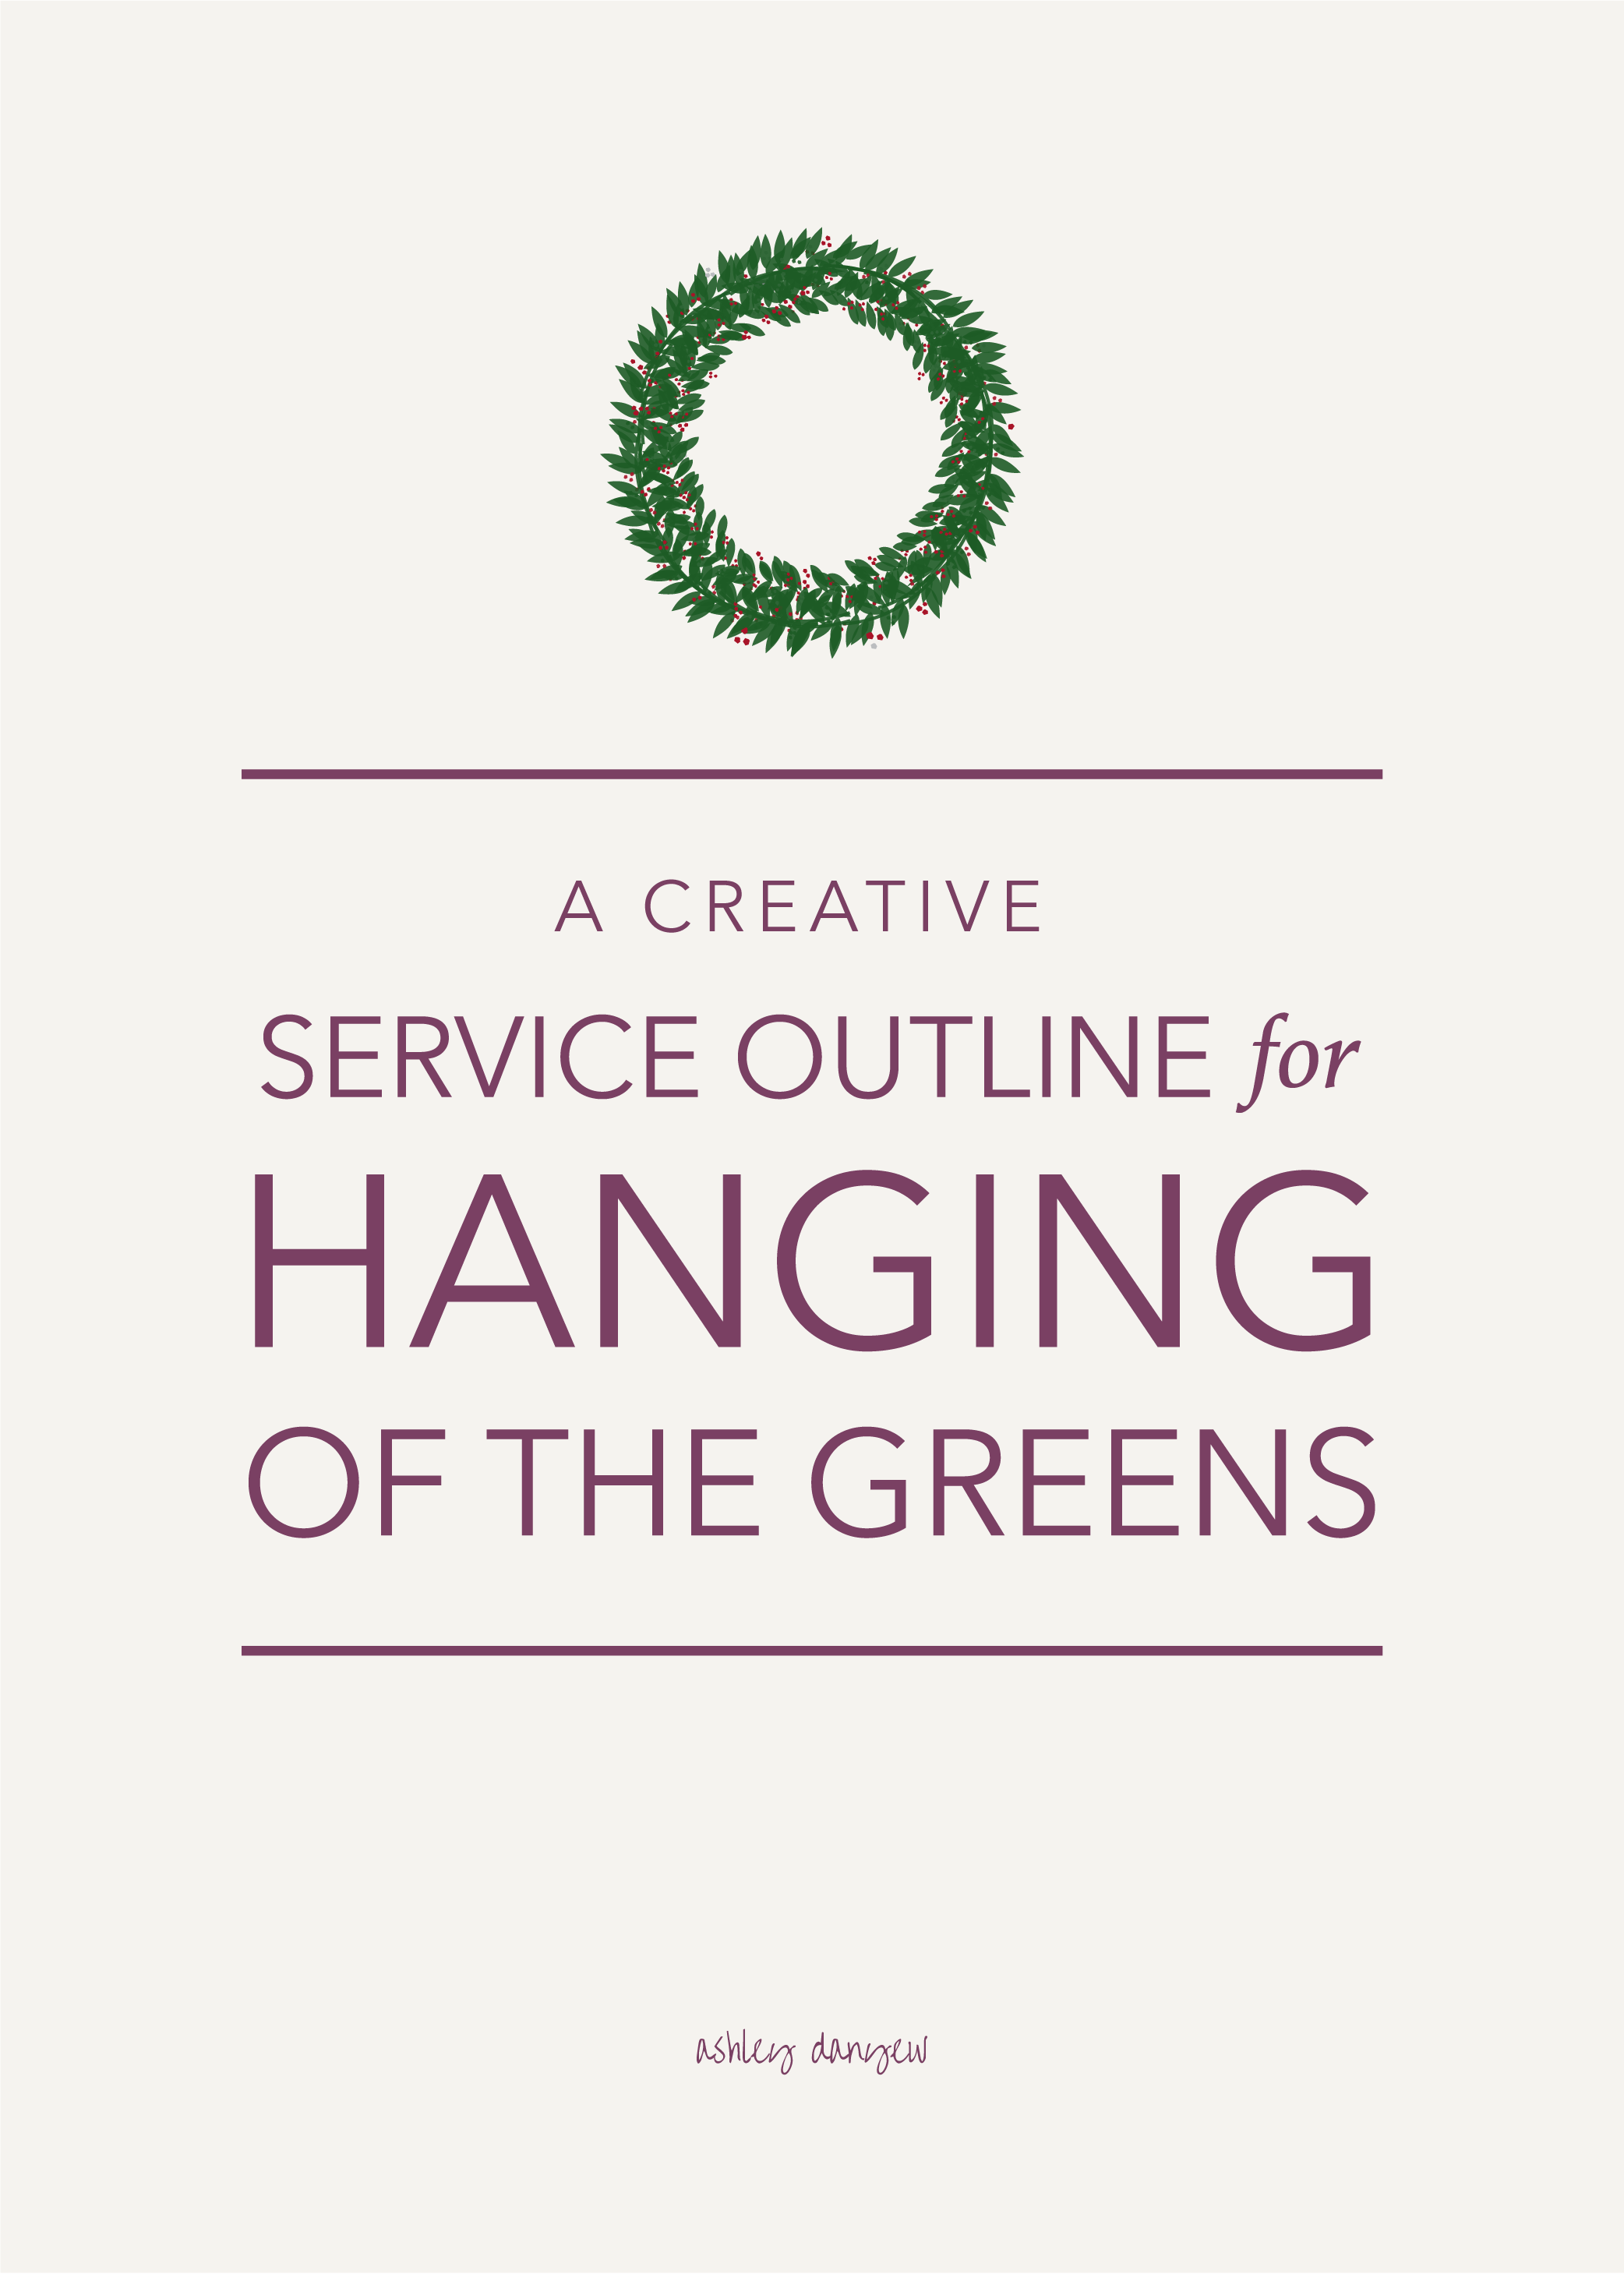 A Creative Service Outline for Hanging of the Greens